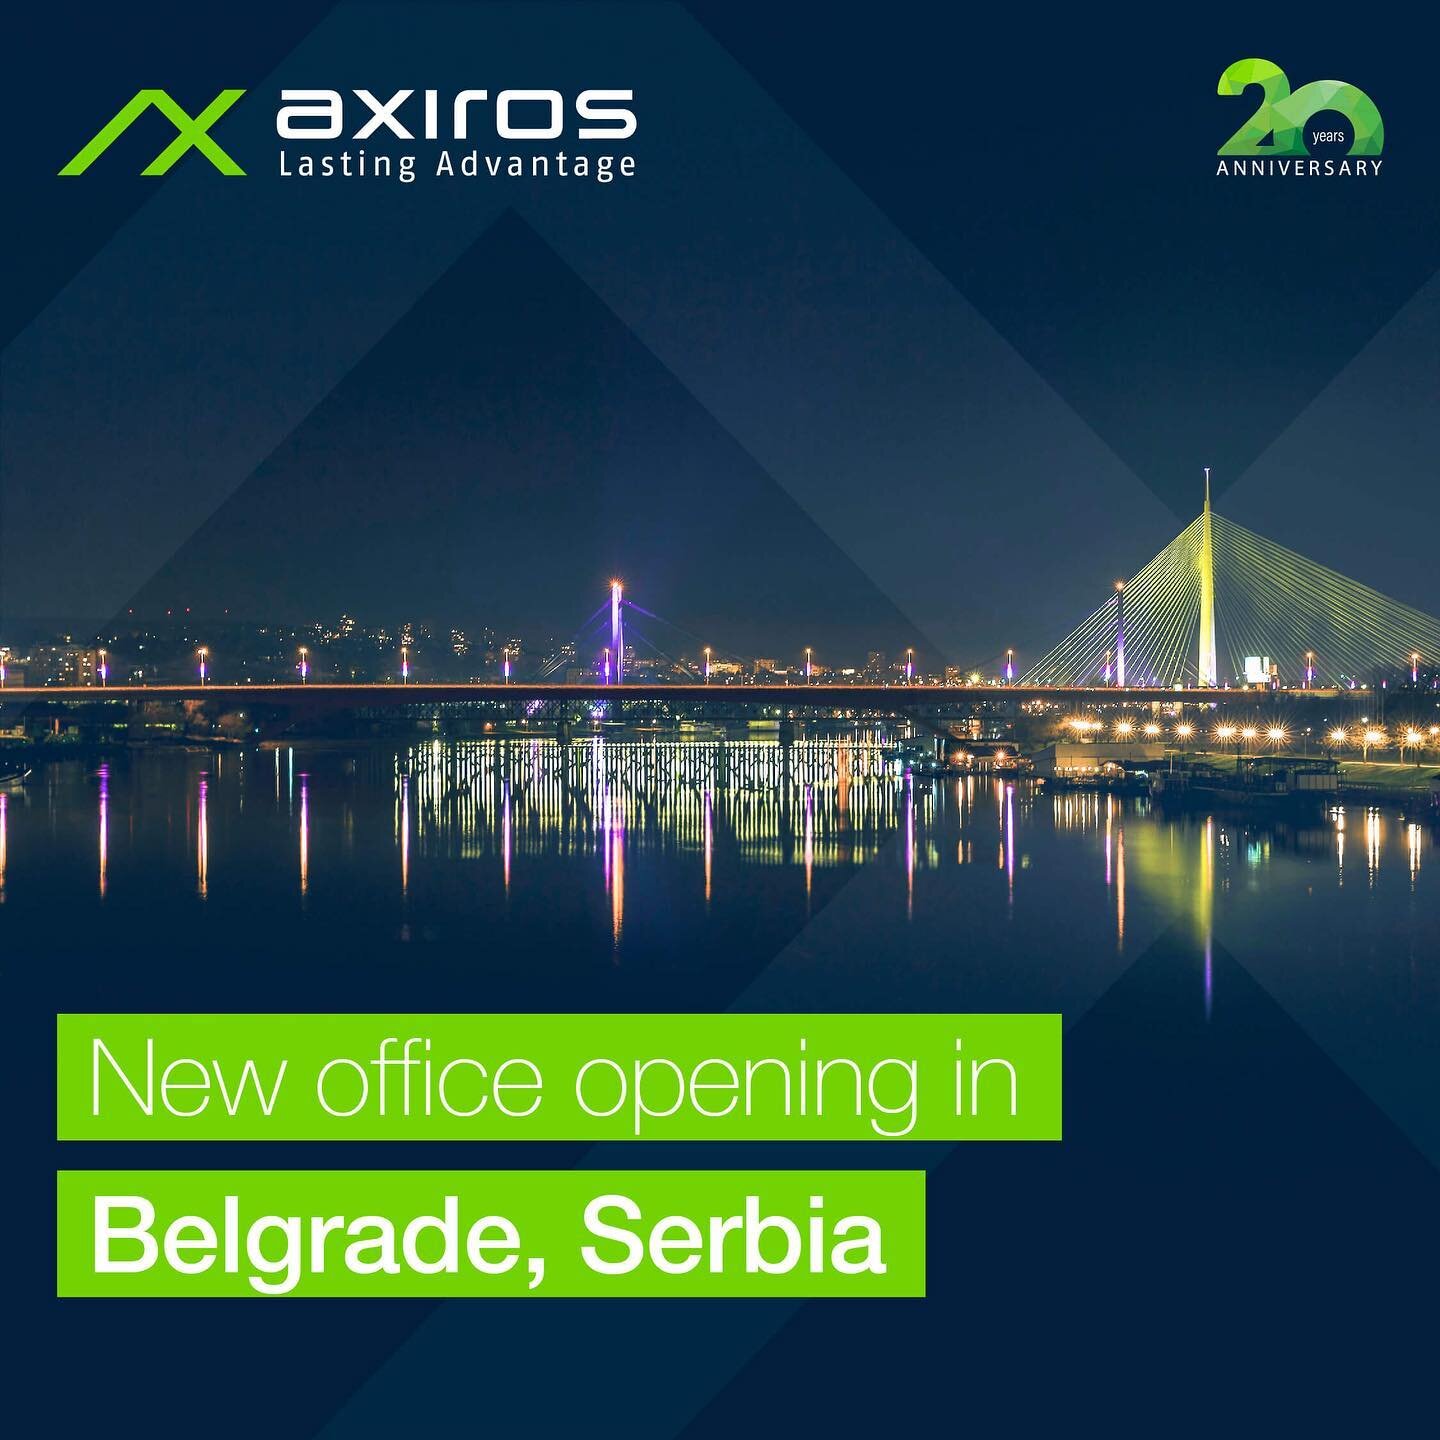 [Axiros News] Axiros is growing again! 🌍🚀

Axiros has established a new office in Serbia's capital city of Belgrade as part of the business' ongoing worldwide expansion. ➡️ You can read the full announcement - link in the bio!

We want to thank all